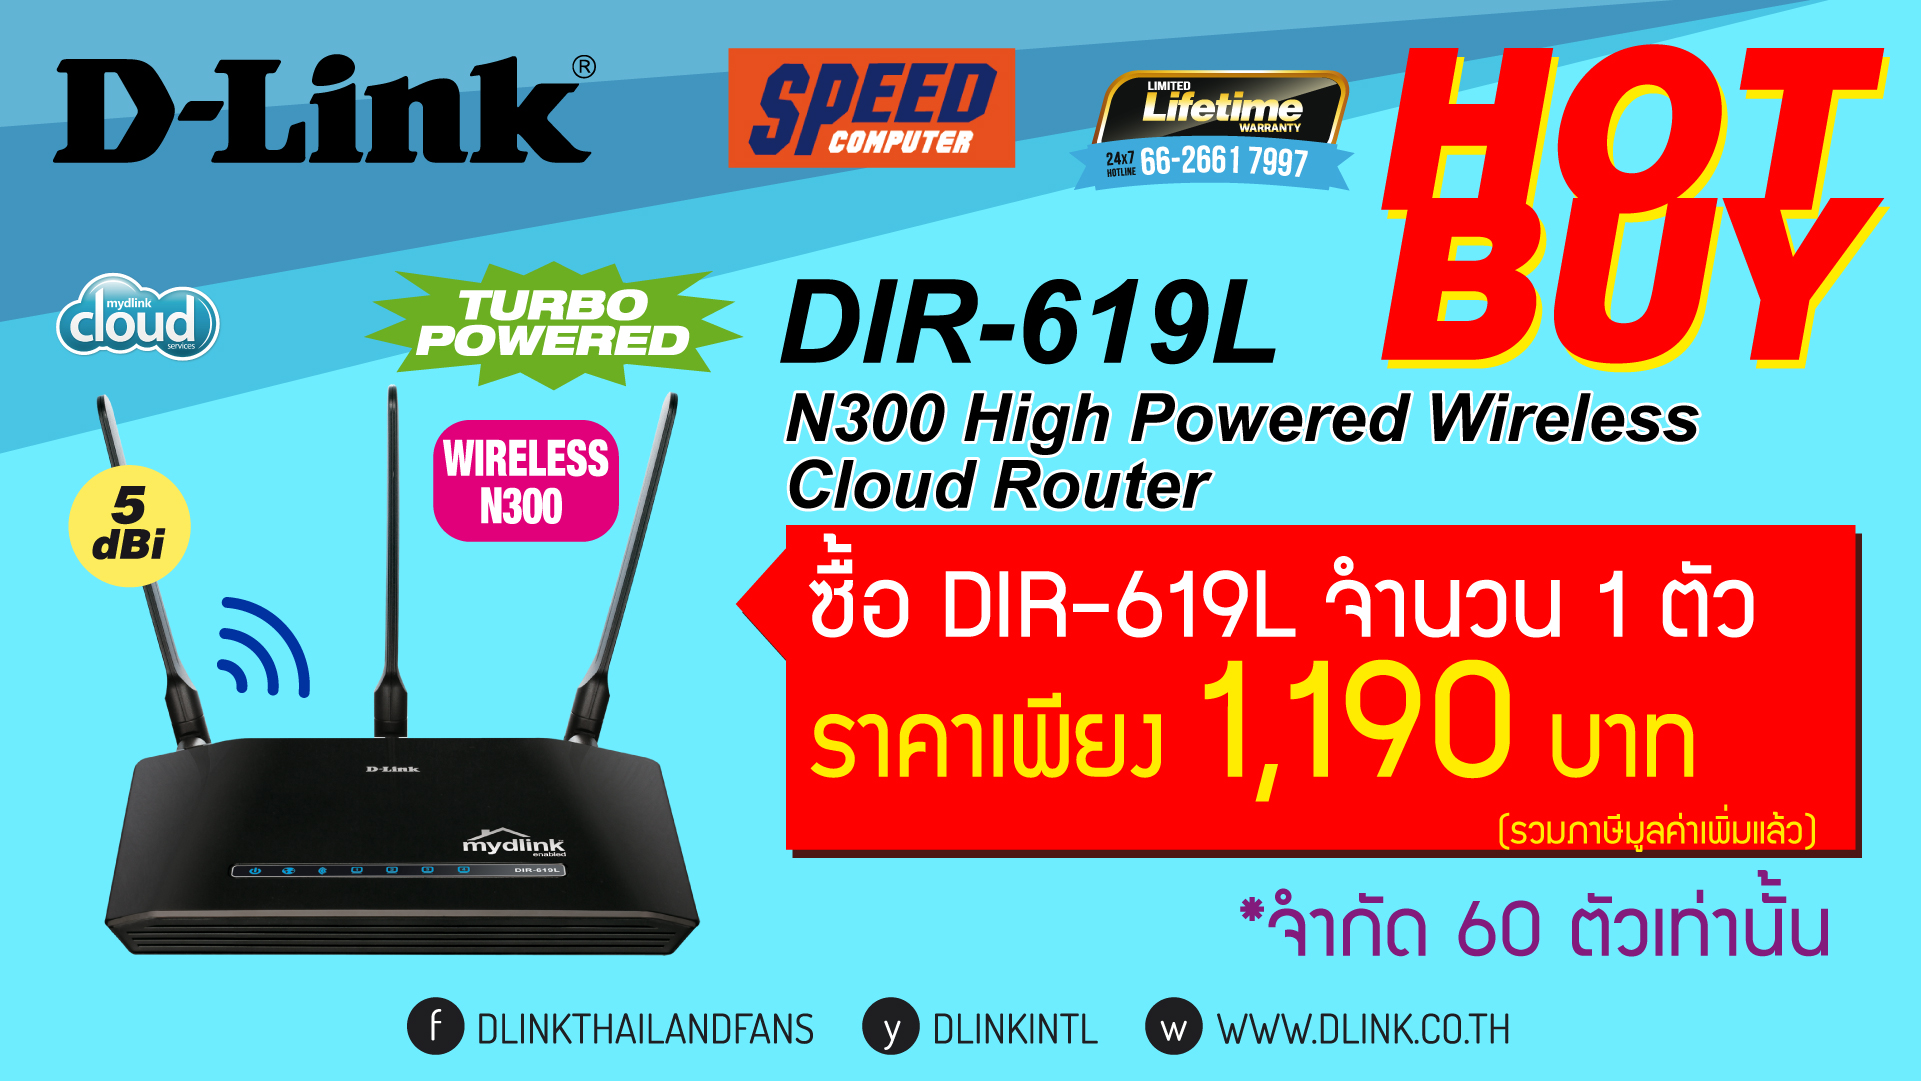 D-Link-Commart-Screen-for-Speed-March-16-08